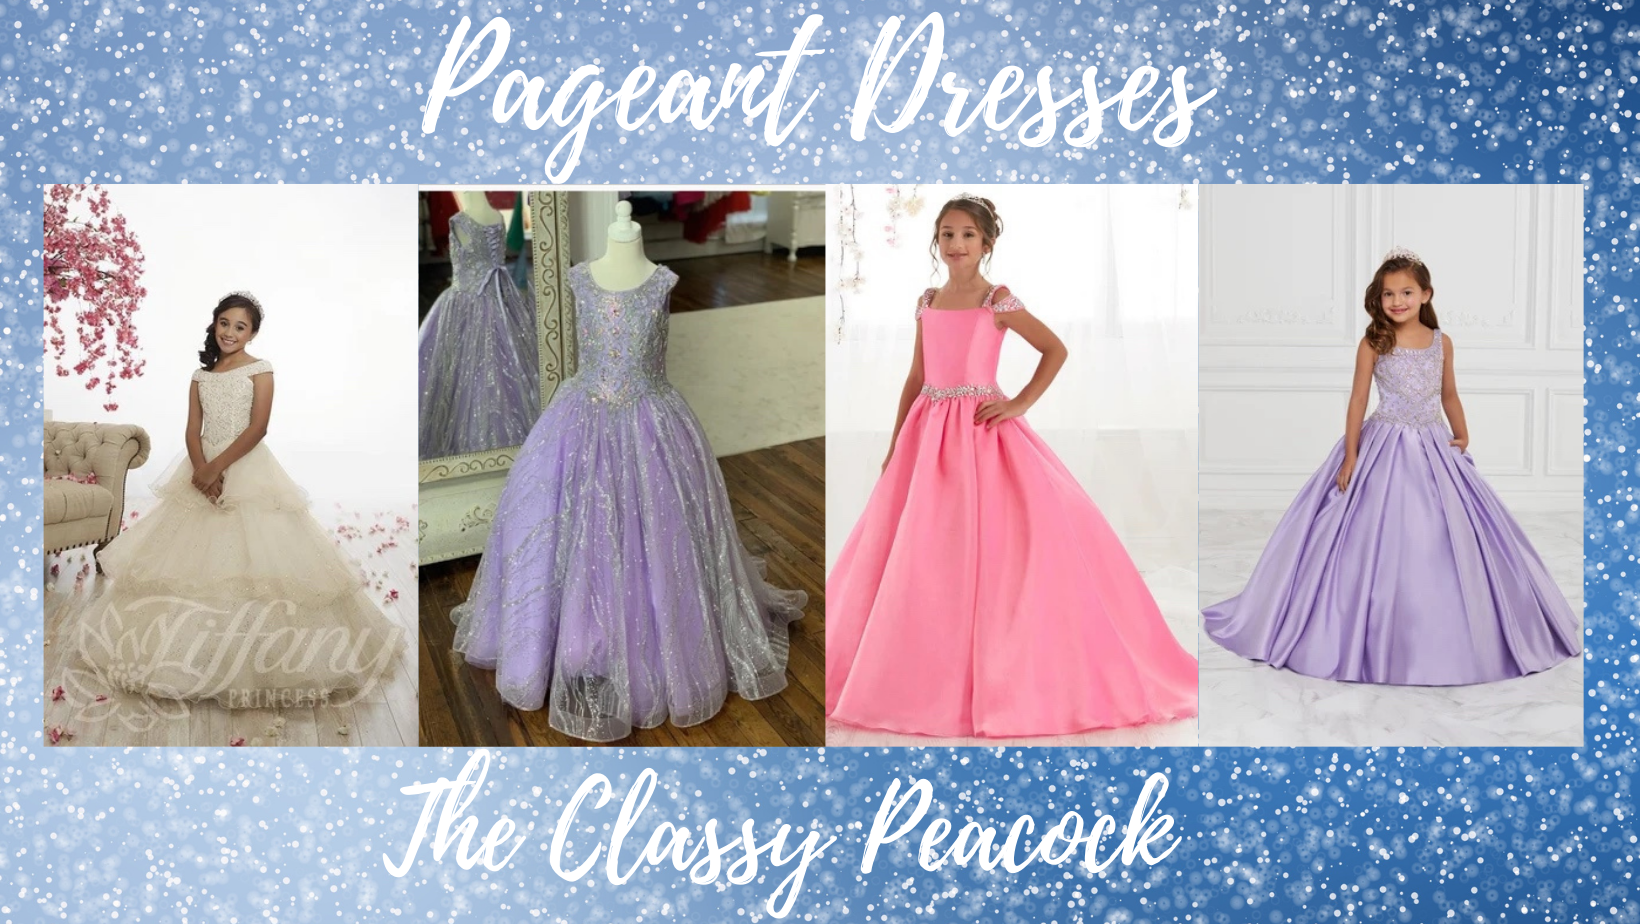 Girls pageant dresses and gowns available for girls sizes 12months to 16 from Tiffany Princess of House of Wu.  These dresses are perfect for the Winnie Rice Festival Pageant as well as other local pageants.